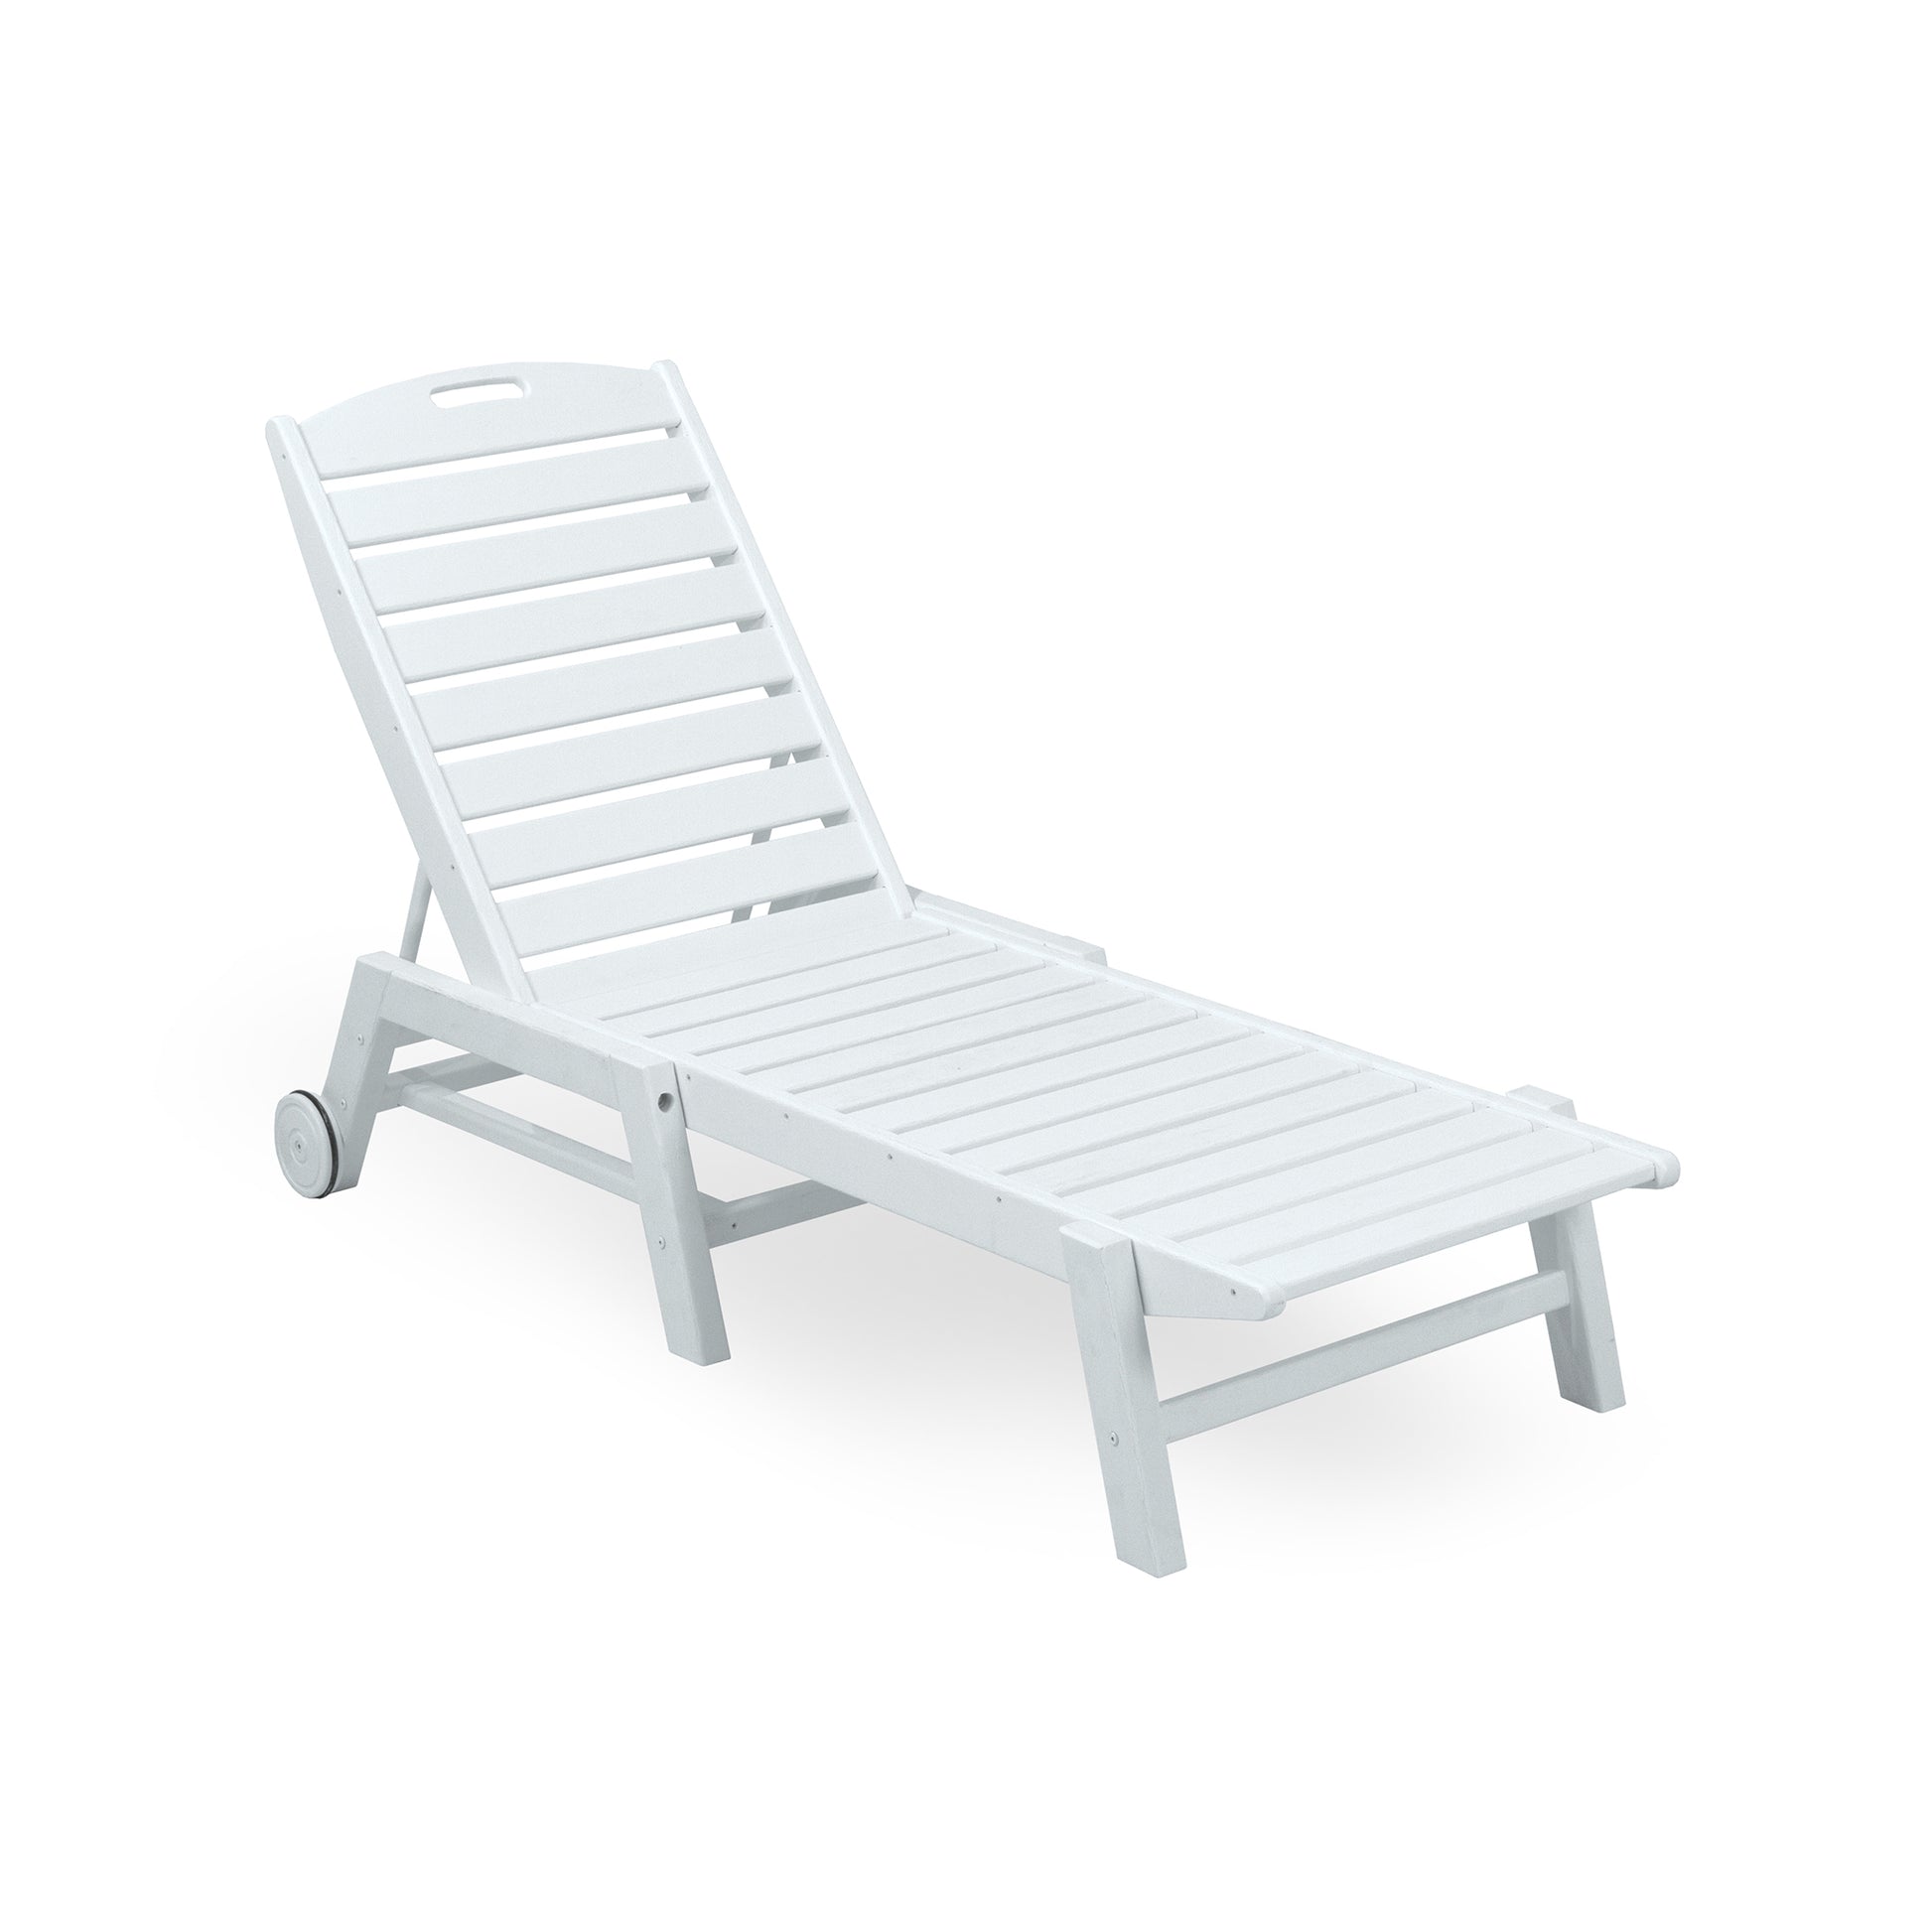 A single POLYWOOD Nautical Wheeled Chaise - Stackable outdoor reclining lounge chair with wheels, isolated on a white background. The chair is made of eco-friendly recycled plastic with a slatted design.